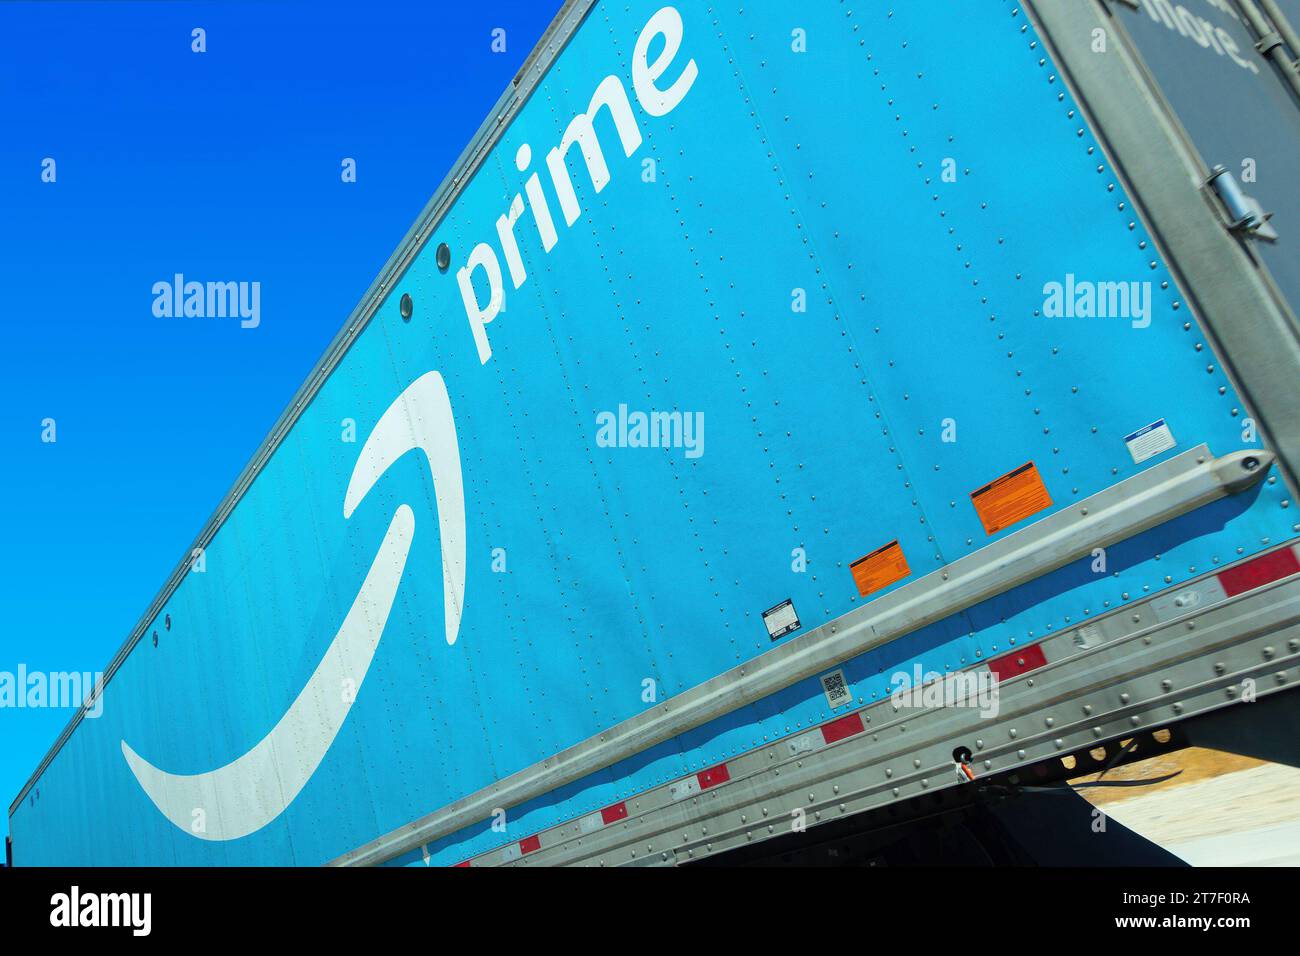 looking up dynamic angle Amazon Prime logo on side of truck on freeway Stock Photo